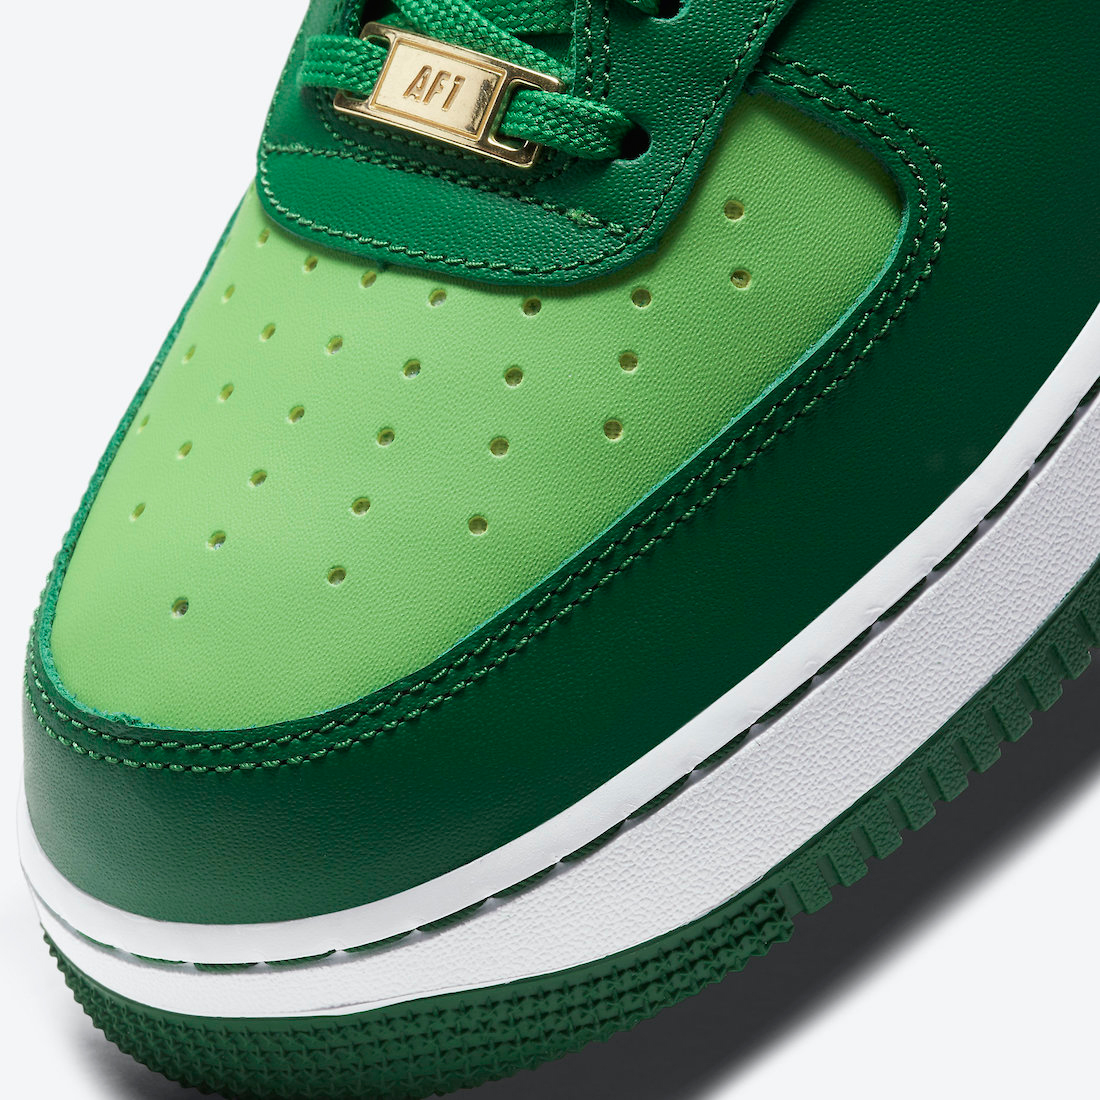 nike-air-force-1-st-patricks-day-2021-release-date-price-resell-where-to-buy-8